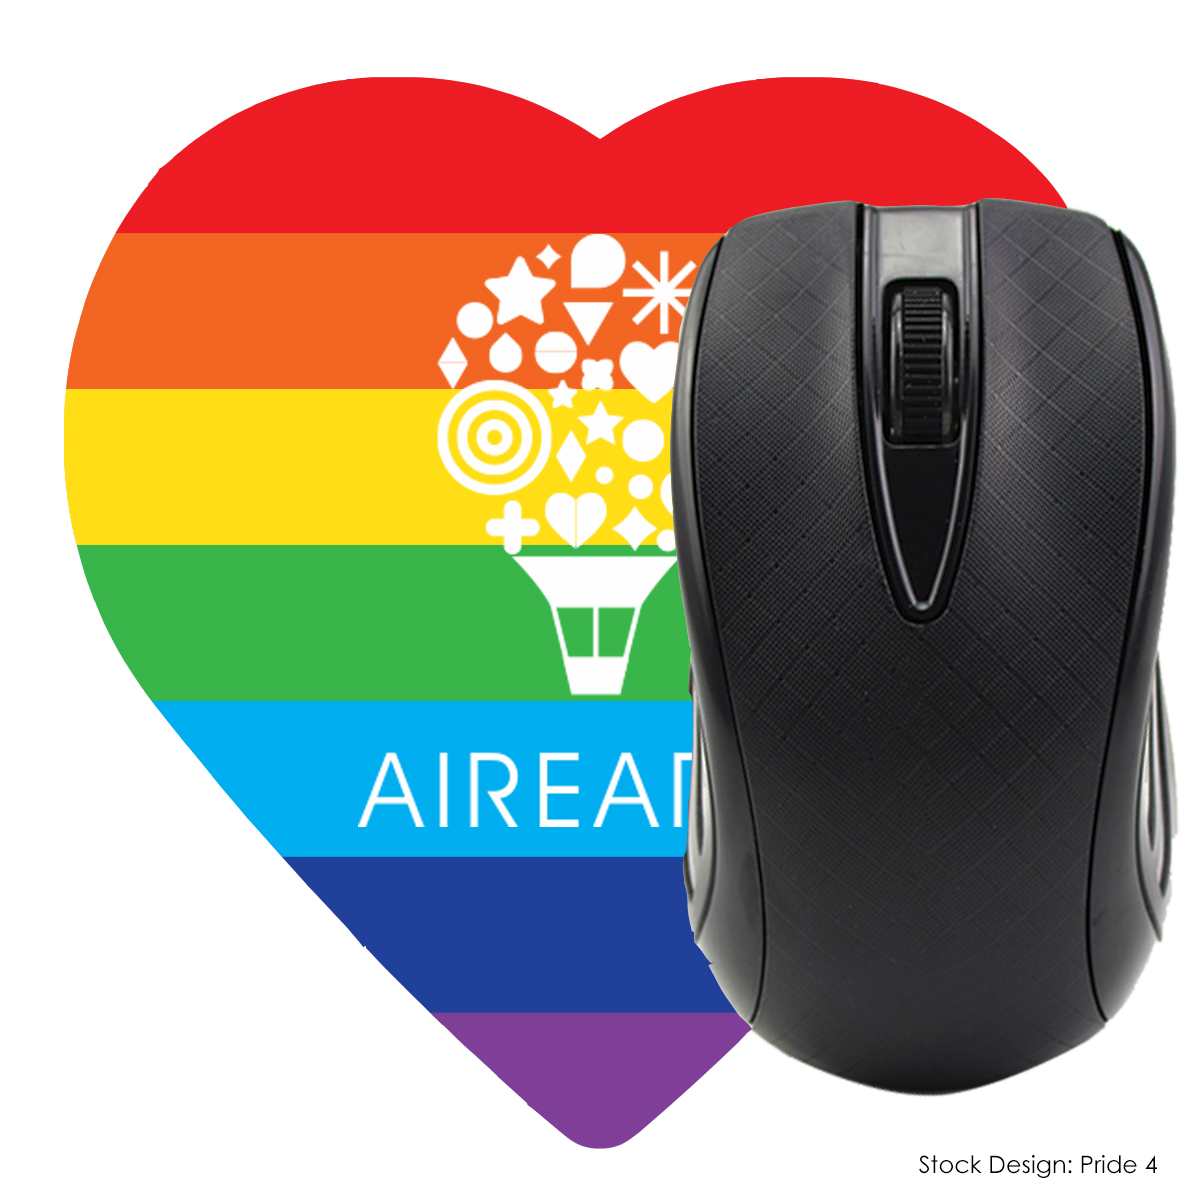 MOUSE-PAD-HRT-PRI - Pride Heart Shaped Computer Mouse Pad - Dye Sublimated